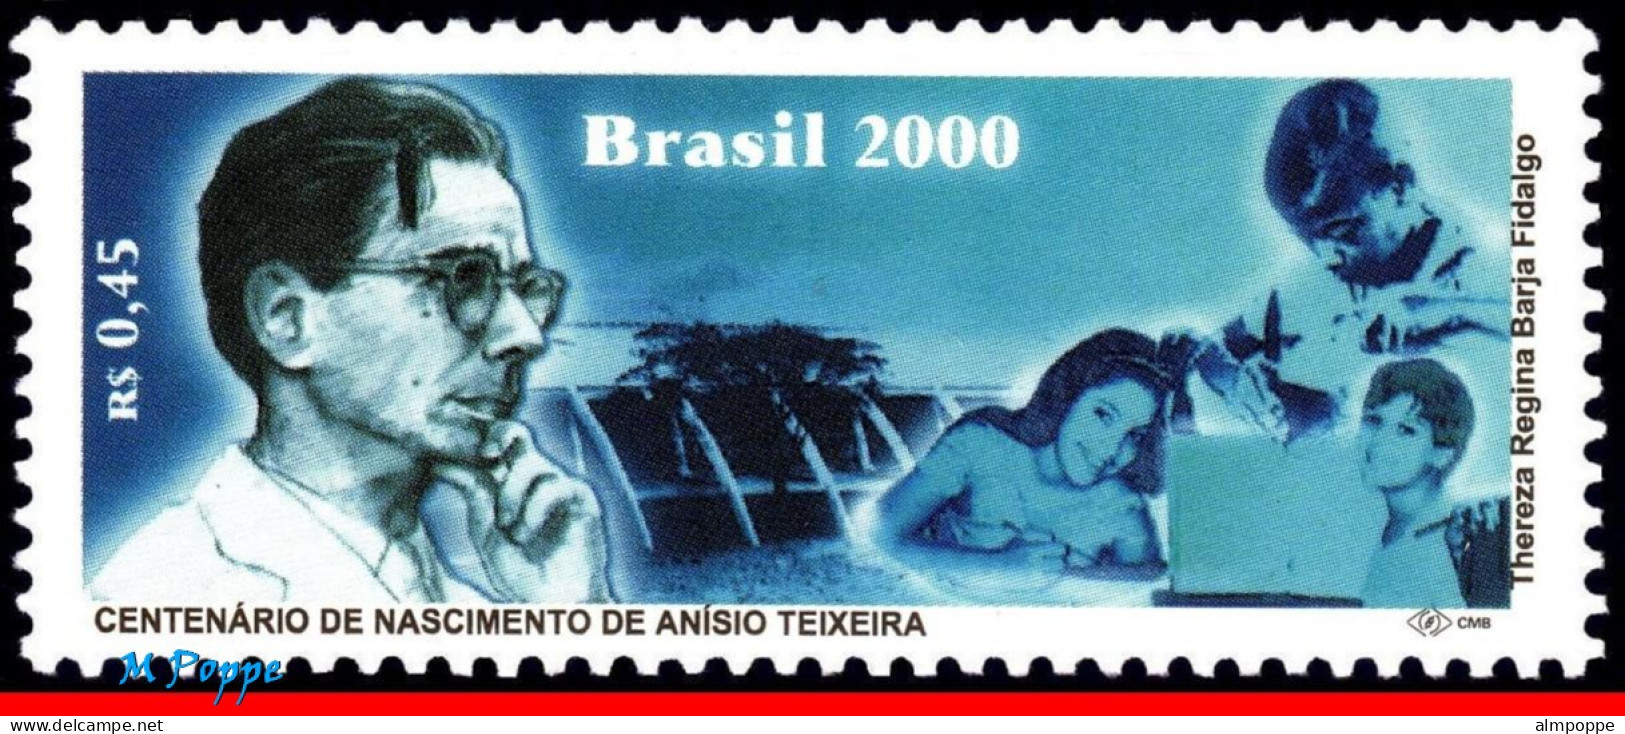 Ref. BR-2756 BRAZIL 2000 - ANISIO TEIXEIRA, EDUCATOR, SCIENCE, MI# 3050, MNH, FAMOUS PEOPLE 1V Sc# 2756 - Neufs